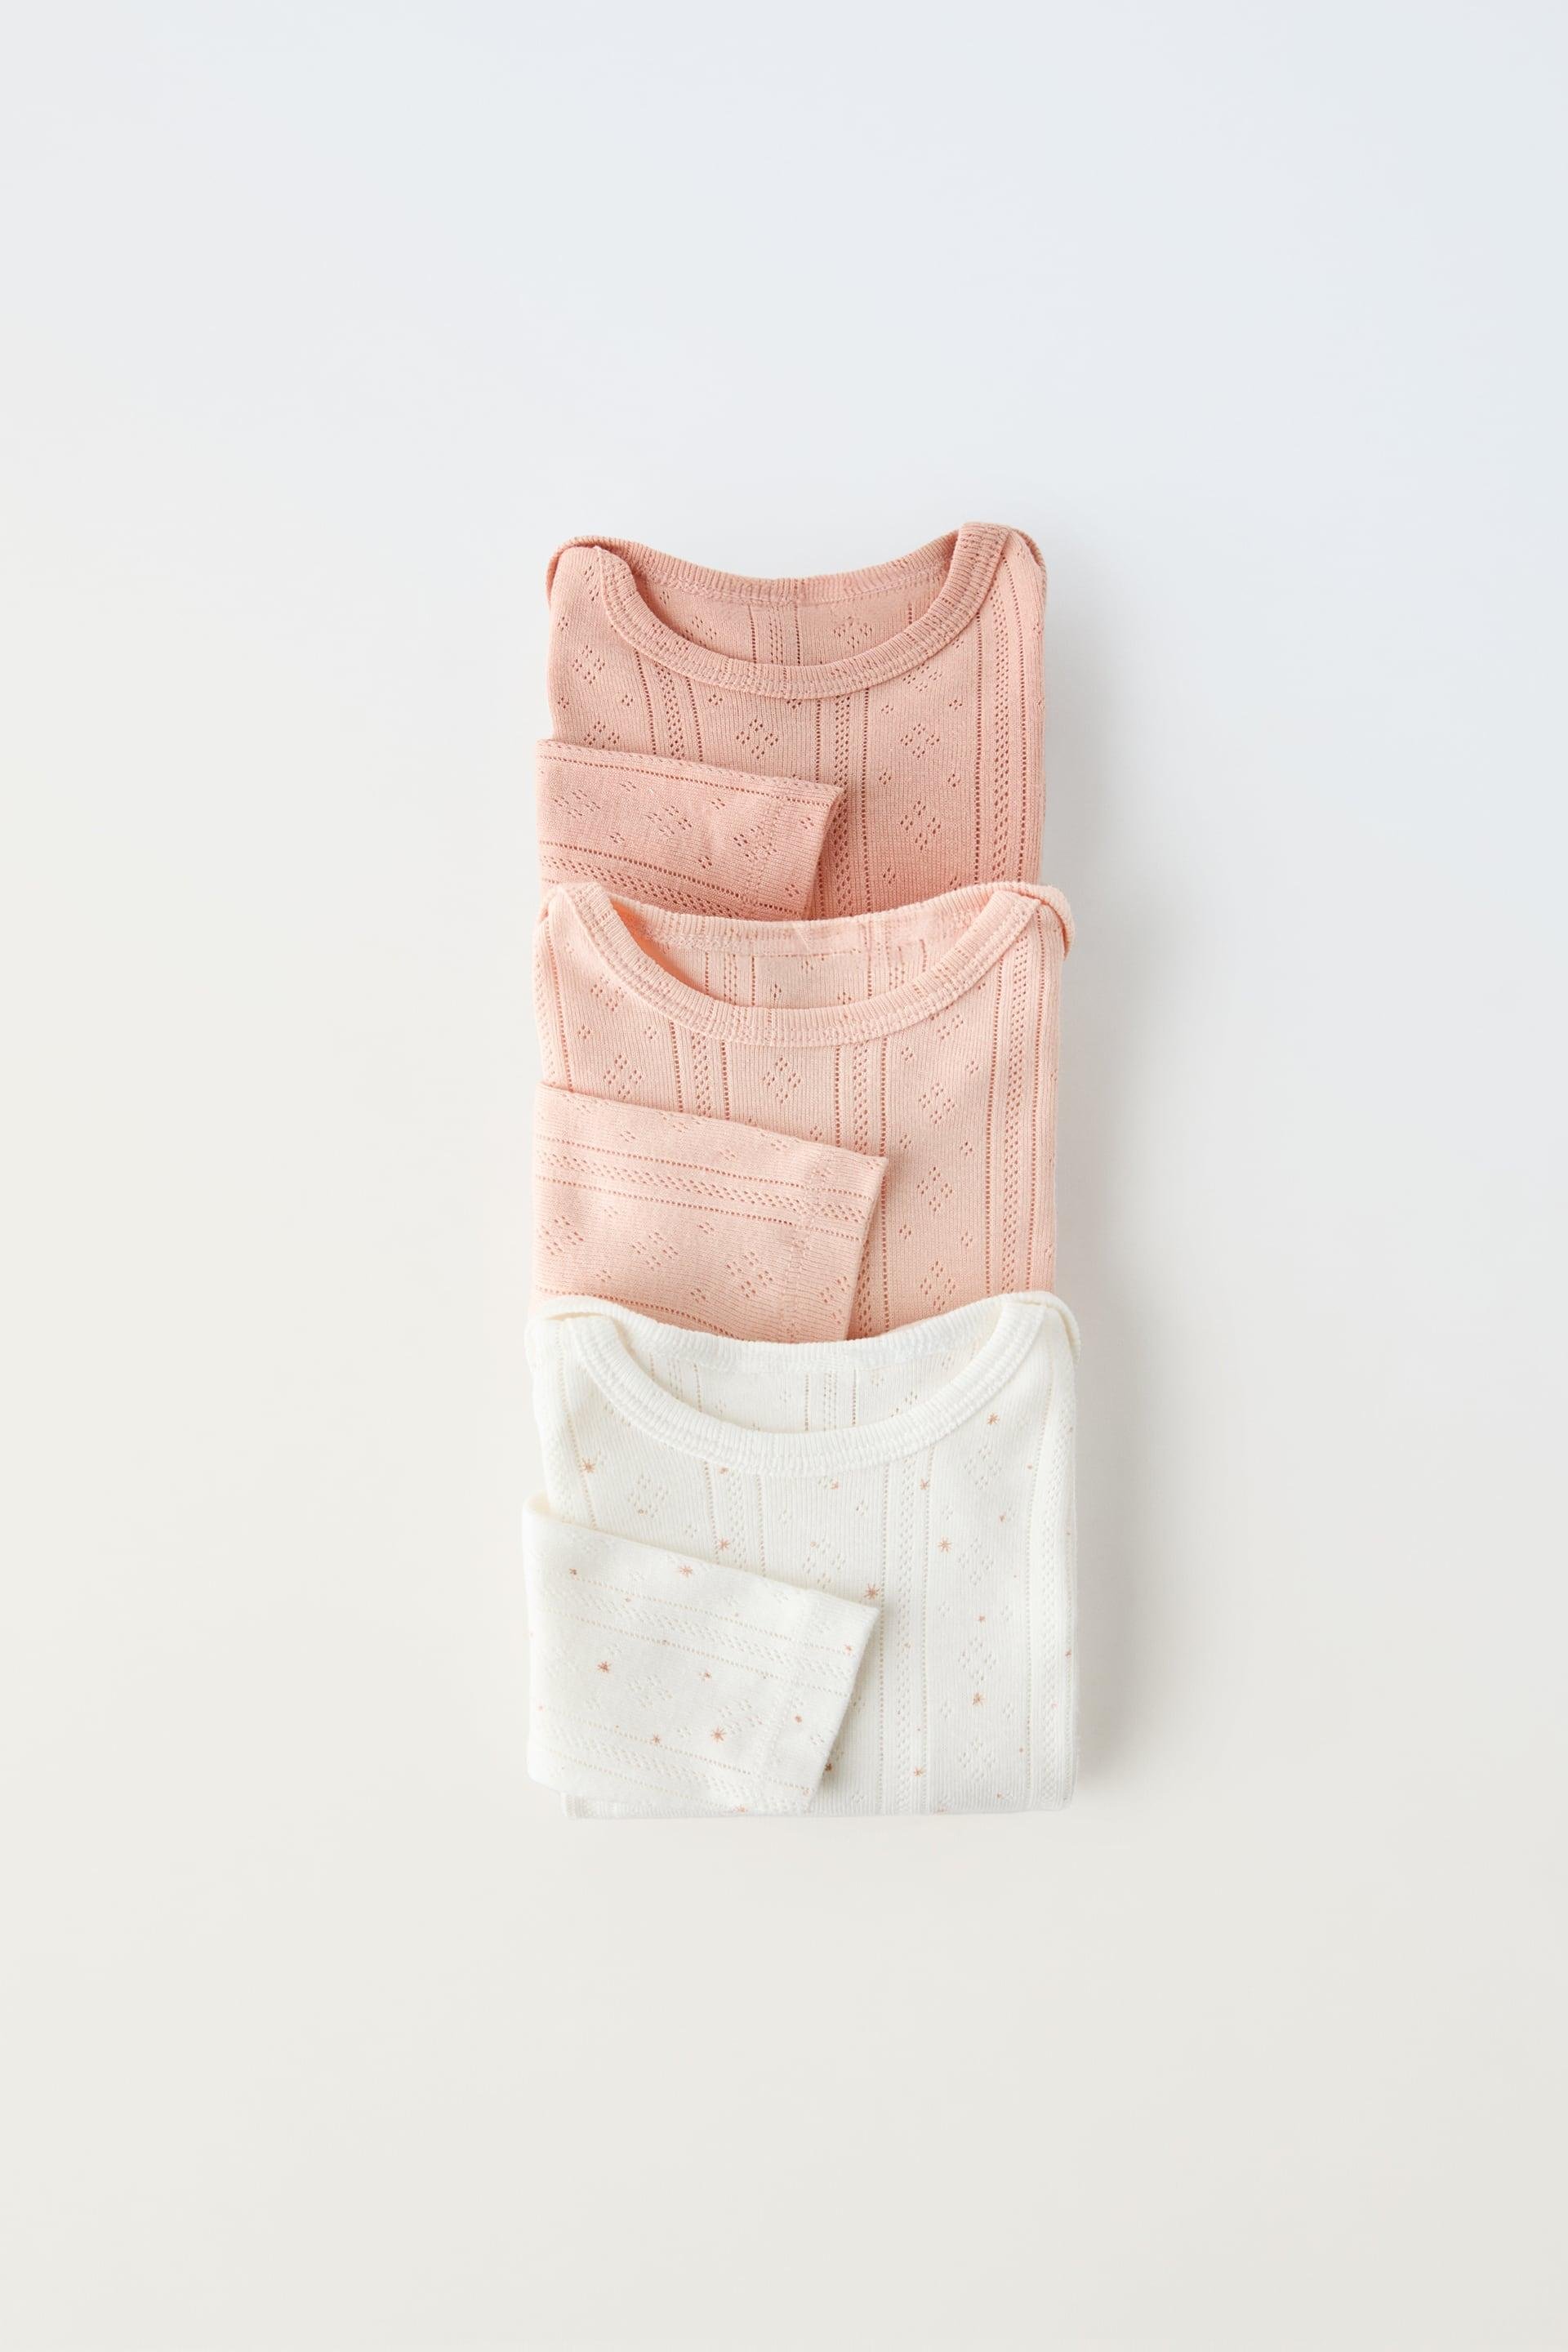 THREE-PACK OF LARGE OPEN WORK BODYSUITS by ZARA